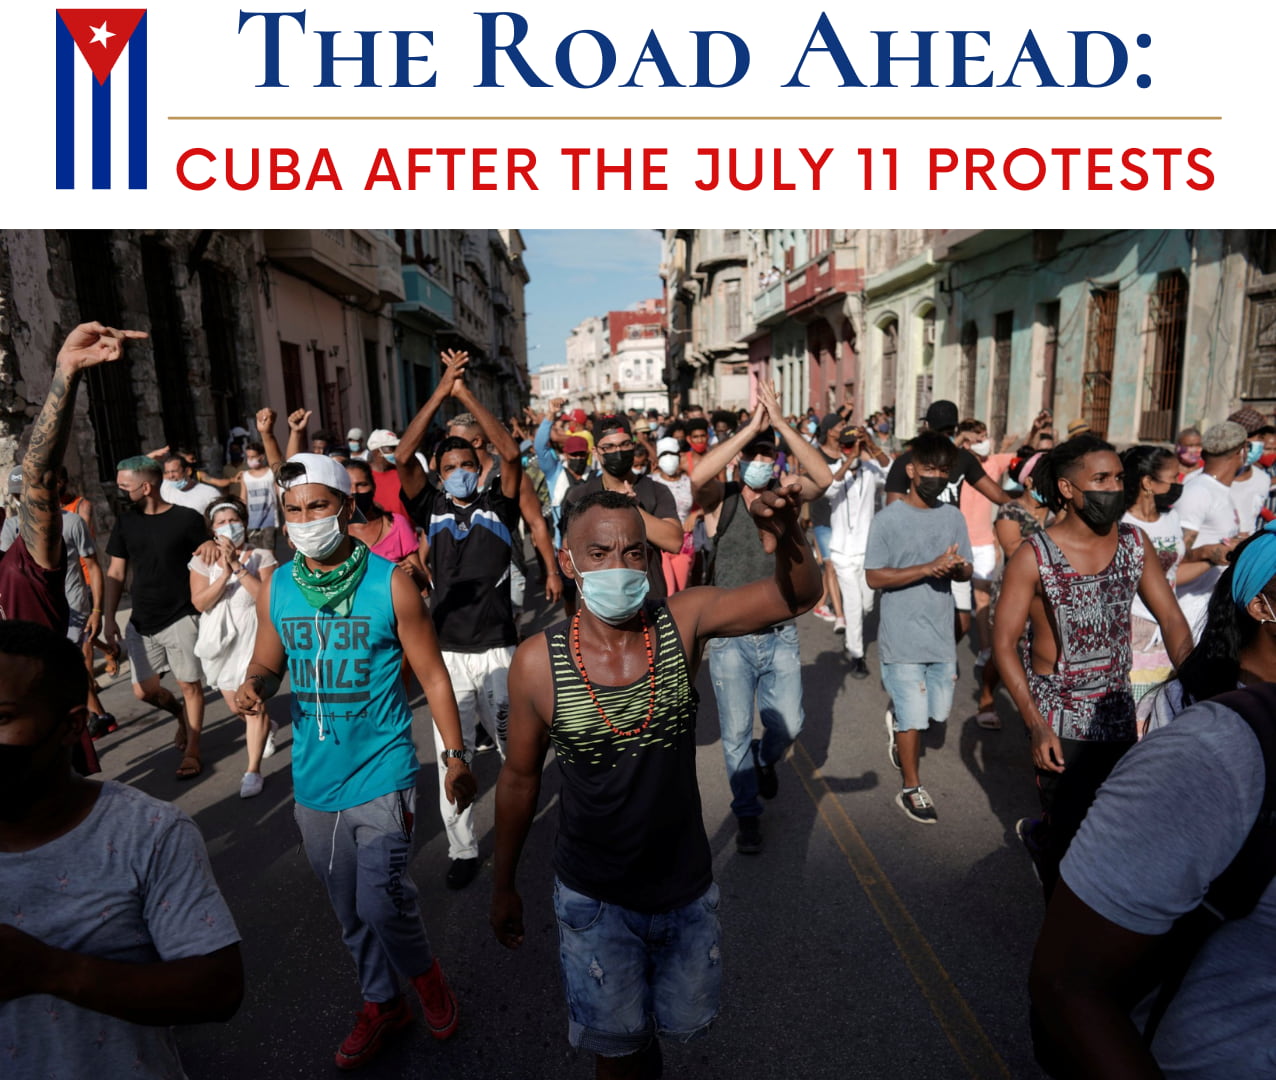 Cuba After the July 11 Protests Image